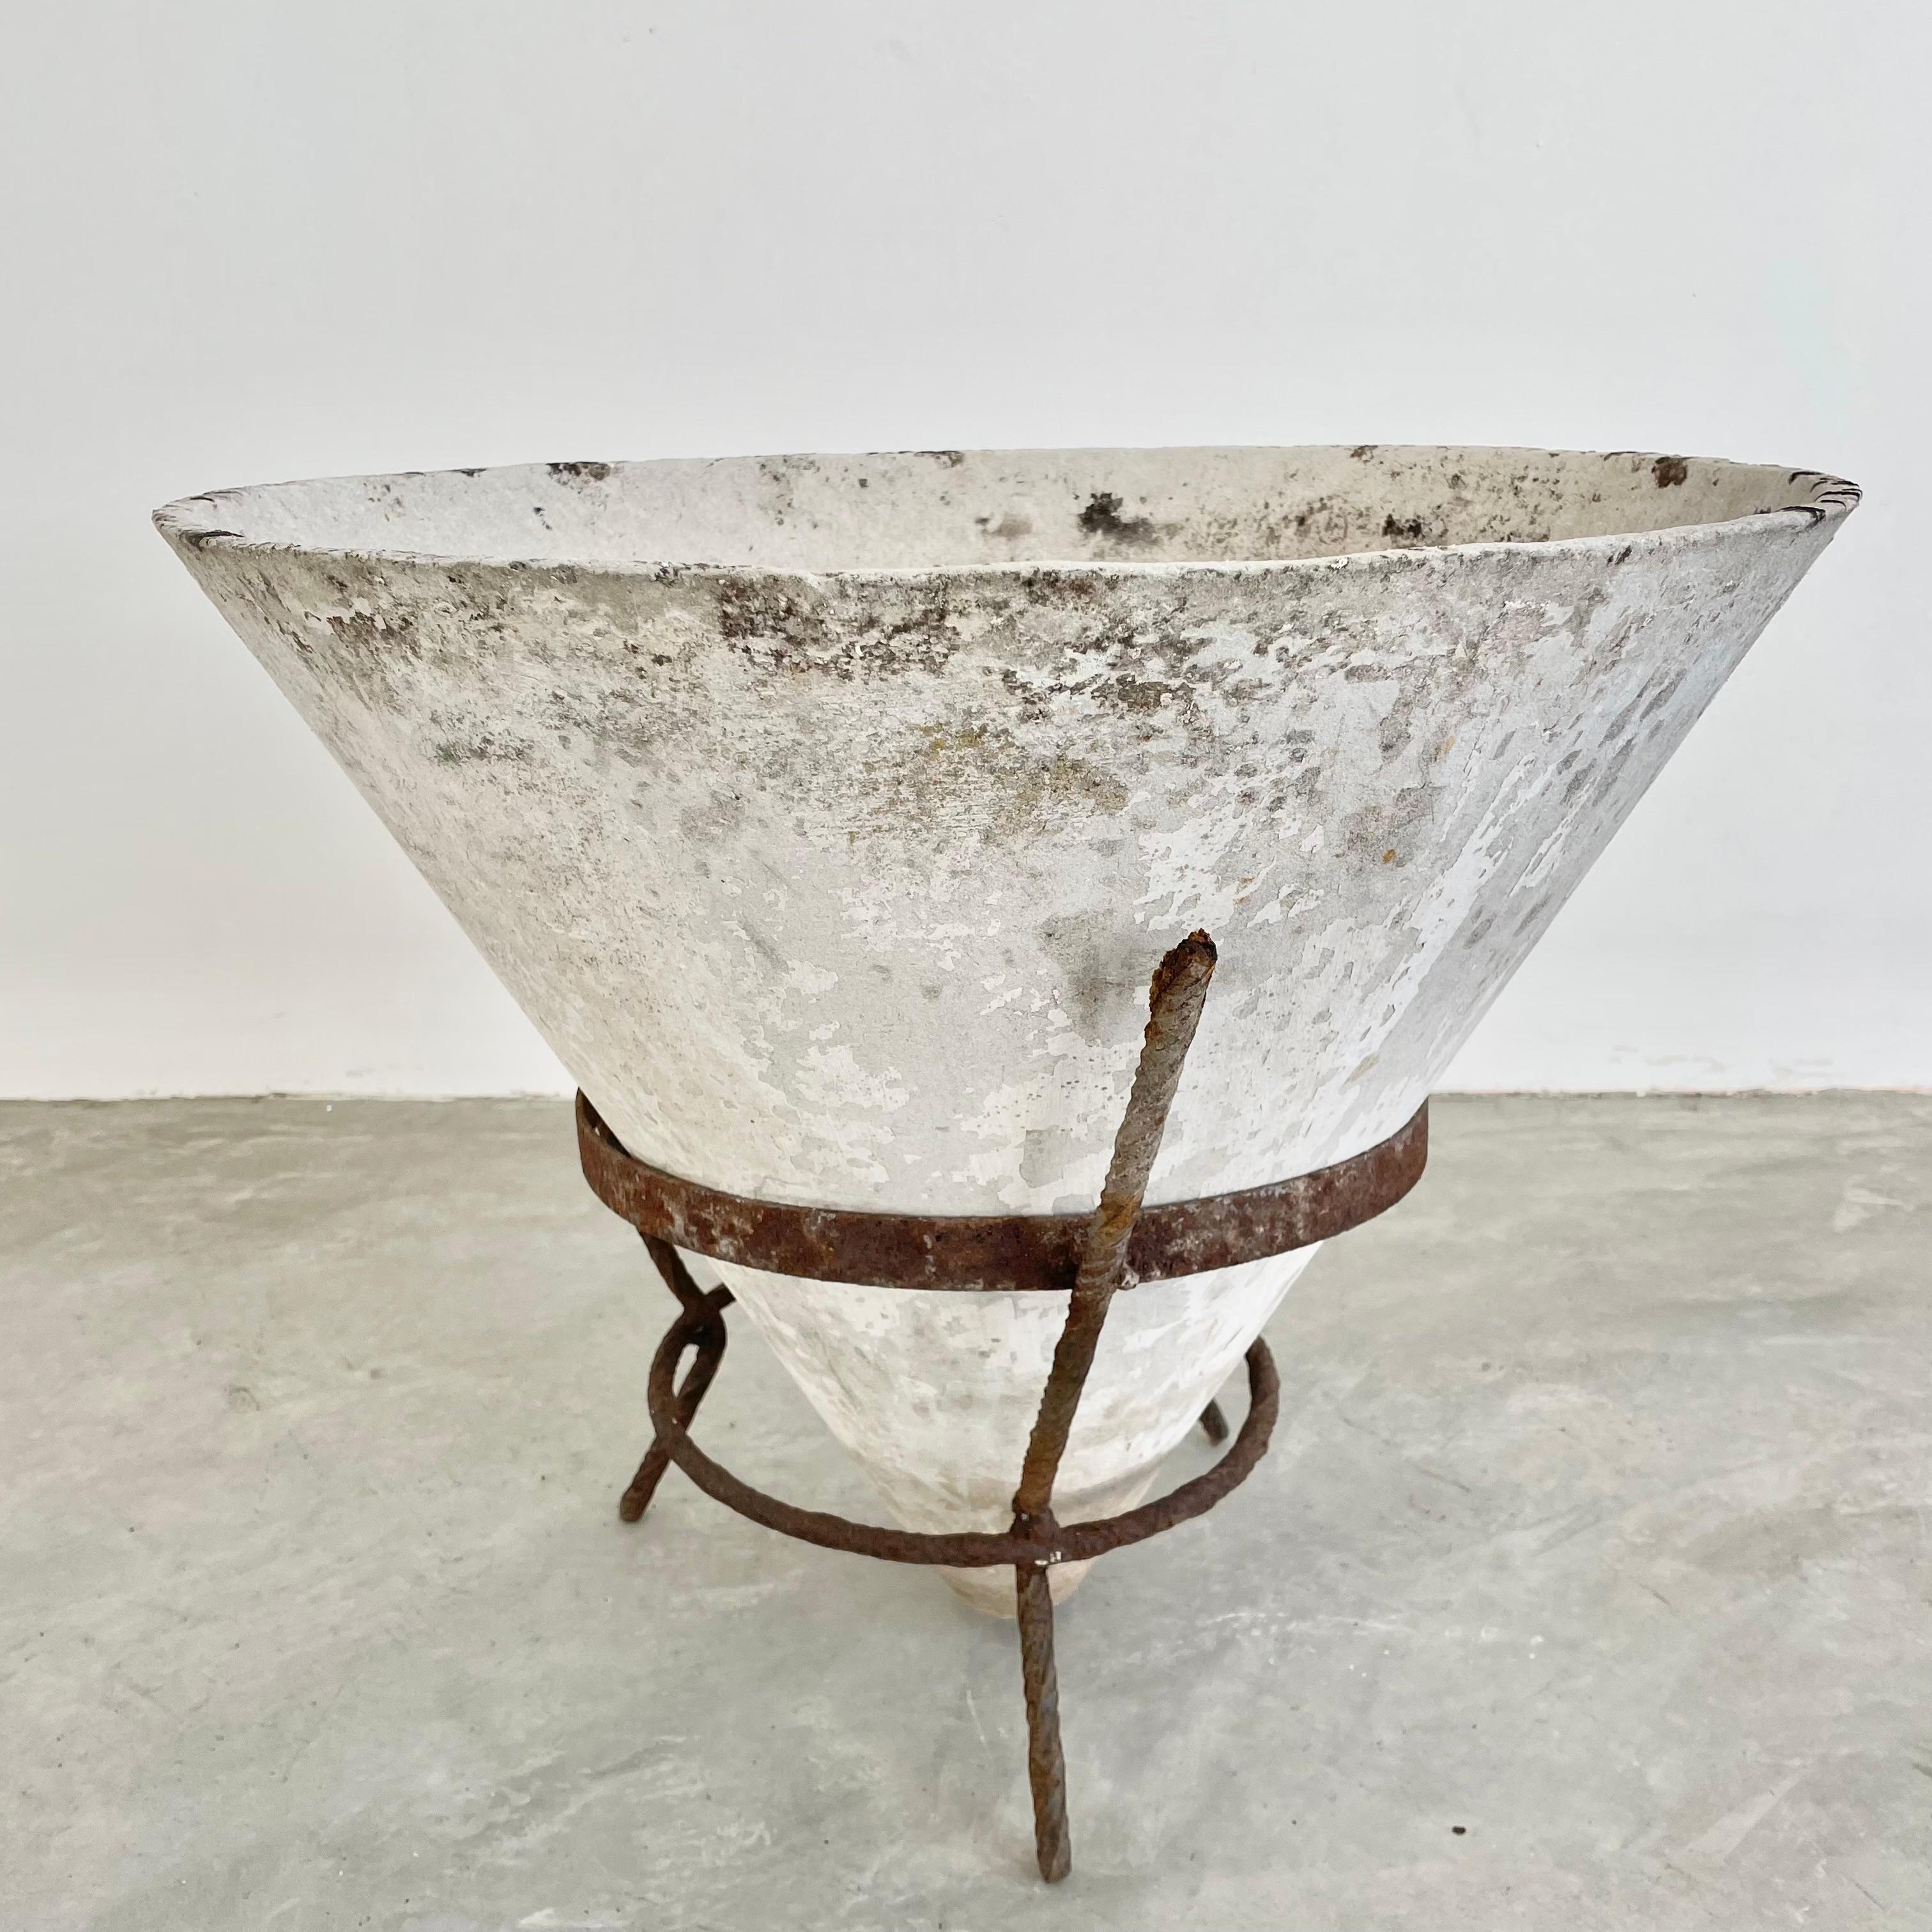 Cone planter by Willy Guhl made in the 1960s, in Switzerland. Inverted concrete cone sits comfortably in an iron tripod stand. Great patina and coloring to planter and the iron stand. Bottom of cone floats about an inch off of the ground.